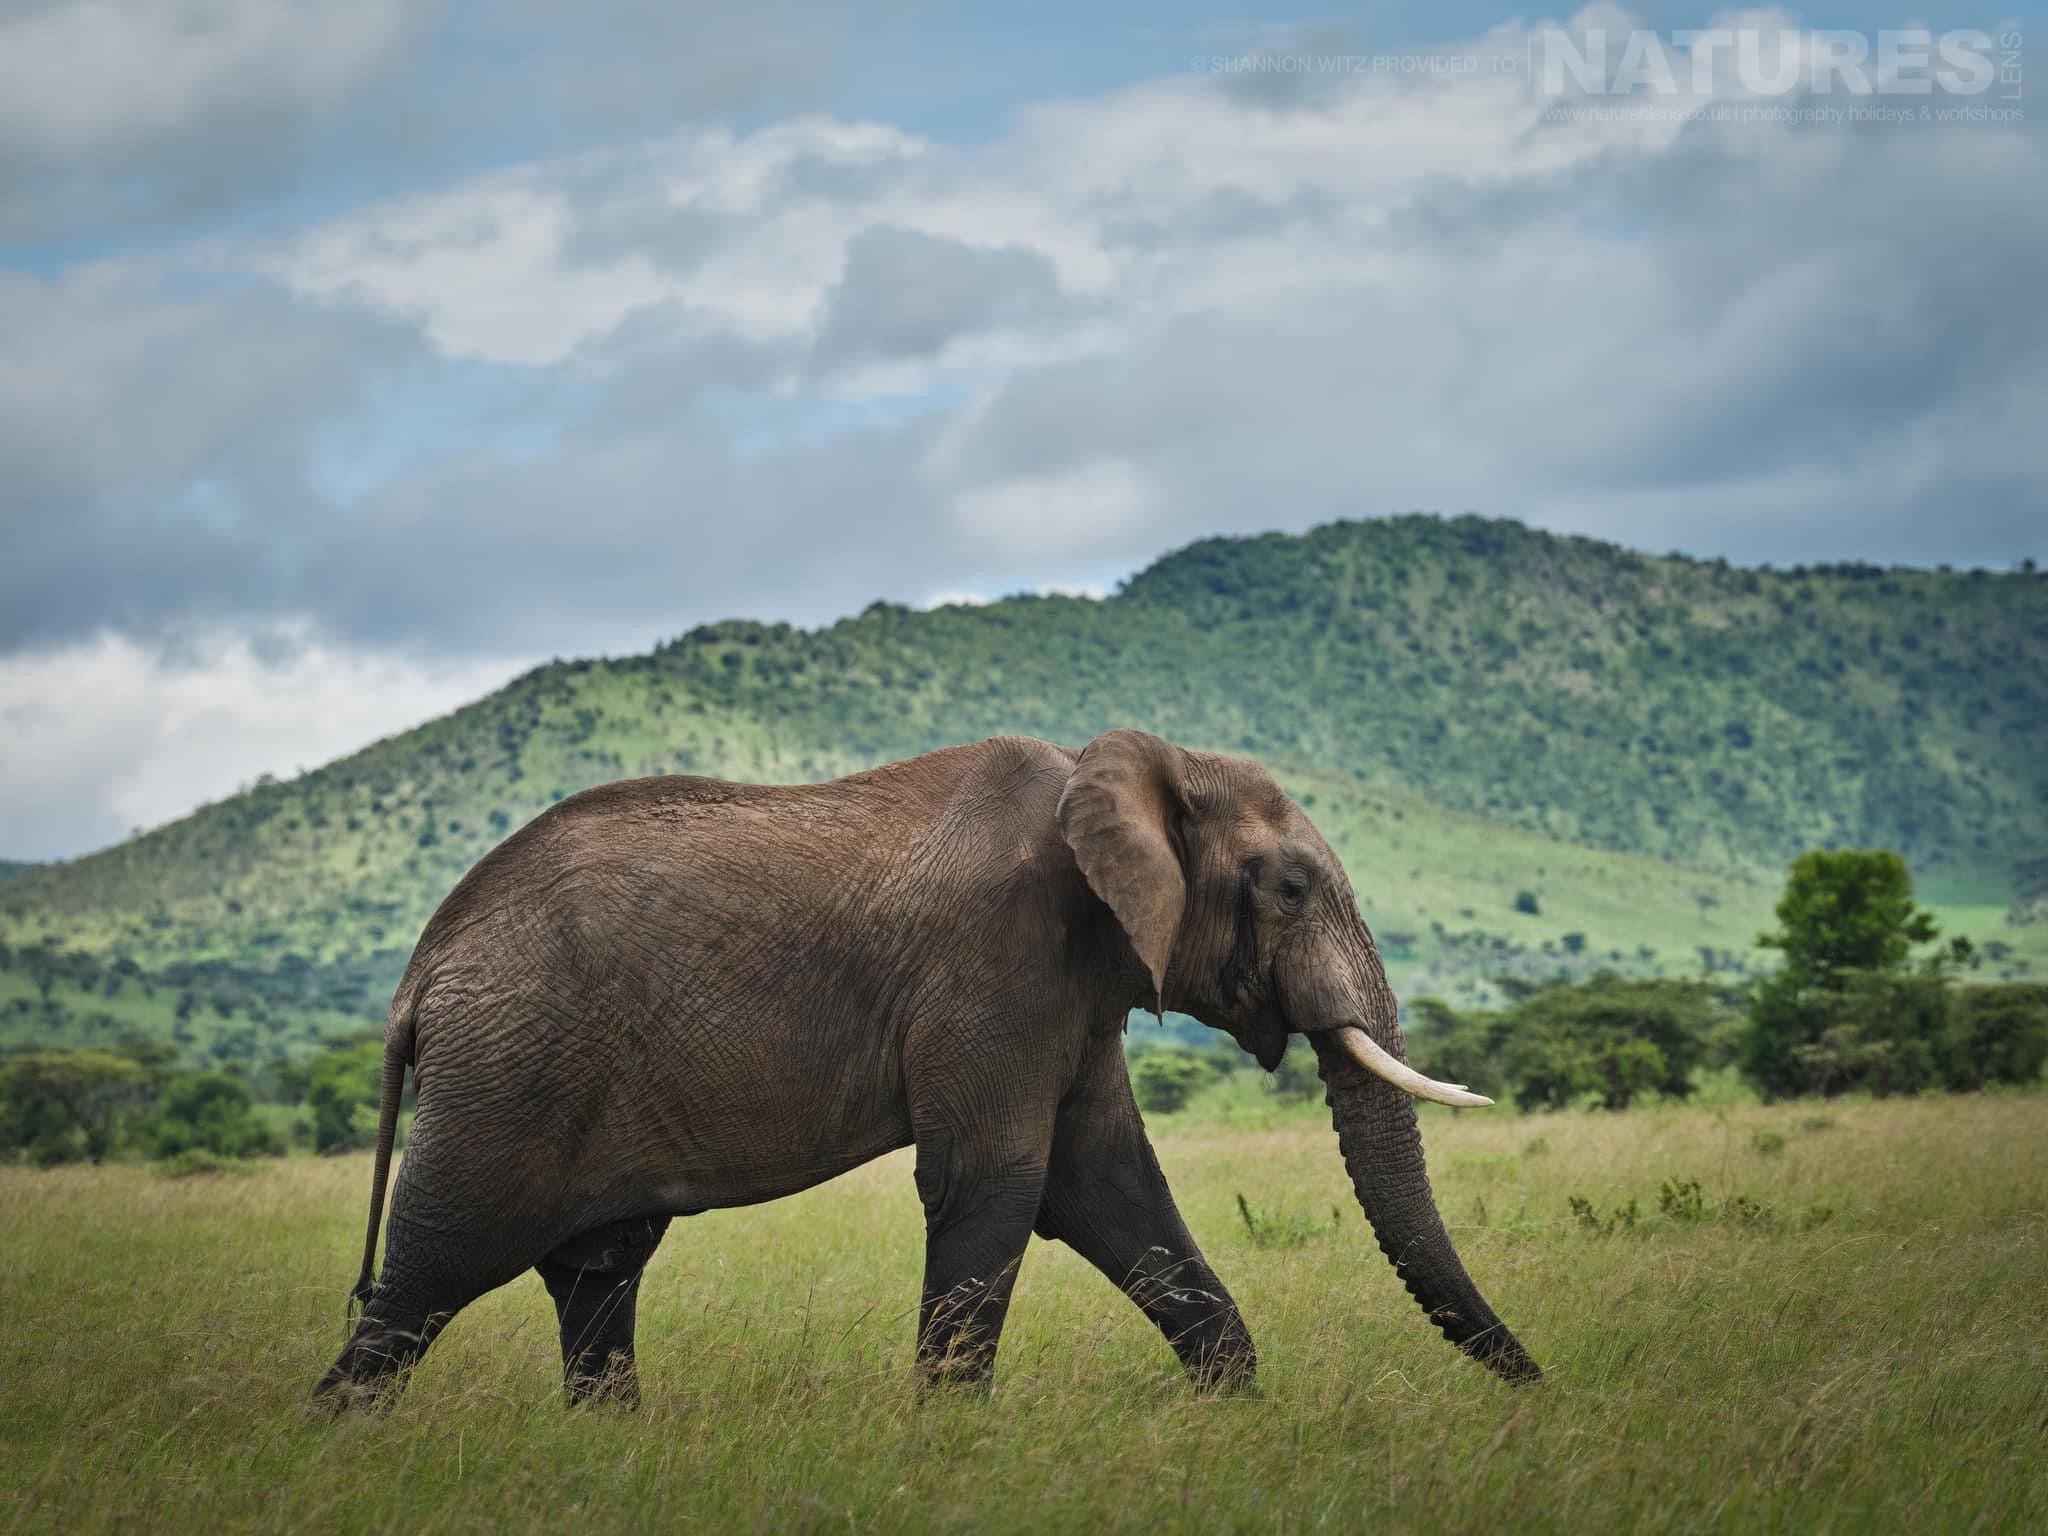 A Large African Elephant Wanders Through The Lobo Region, The Region Of Tanzania That We Use For The Natureslens Wildlife Of The Serengeti Photography Holiday